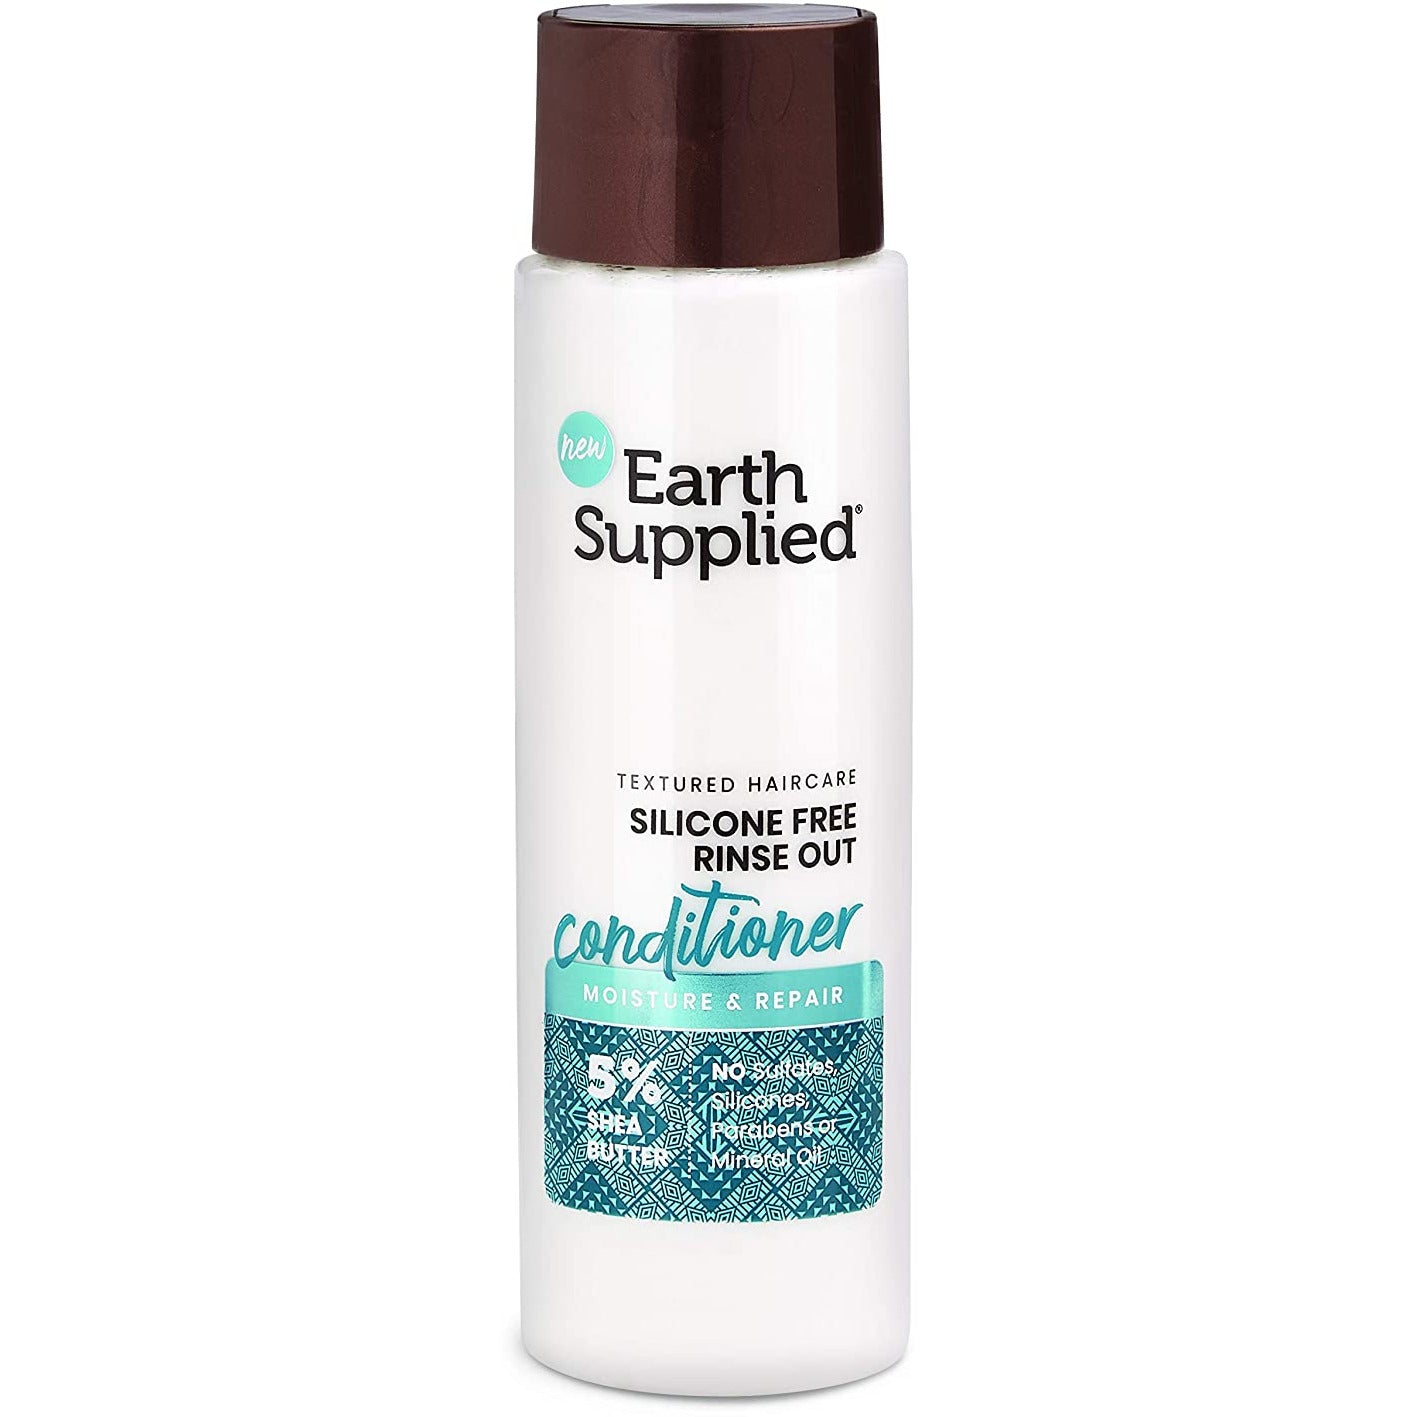 Earth Supplied 5% Shea Butter Silicone Free Rinse Out Moisture & Repair Conditioner 13 oz